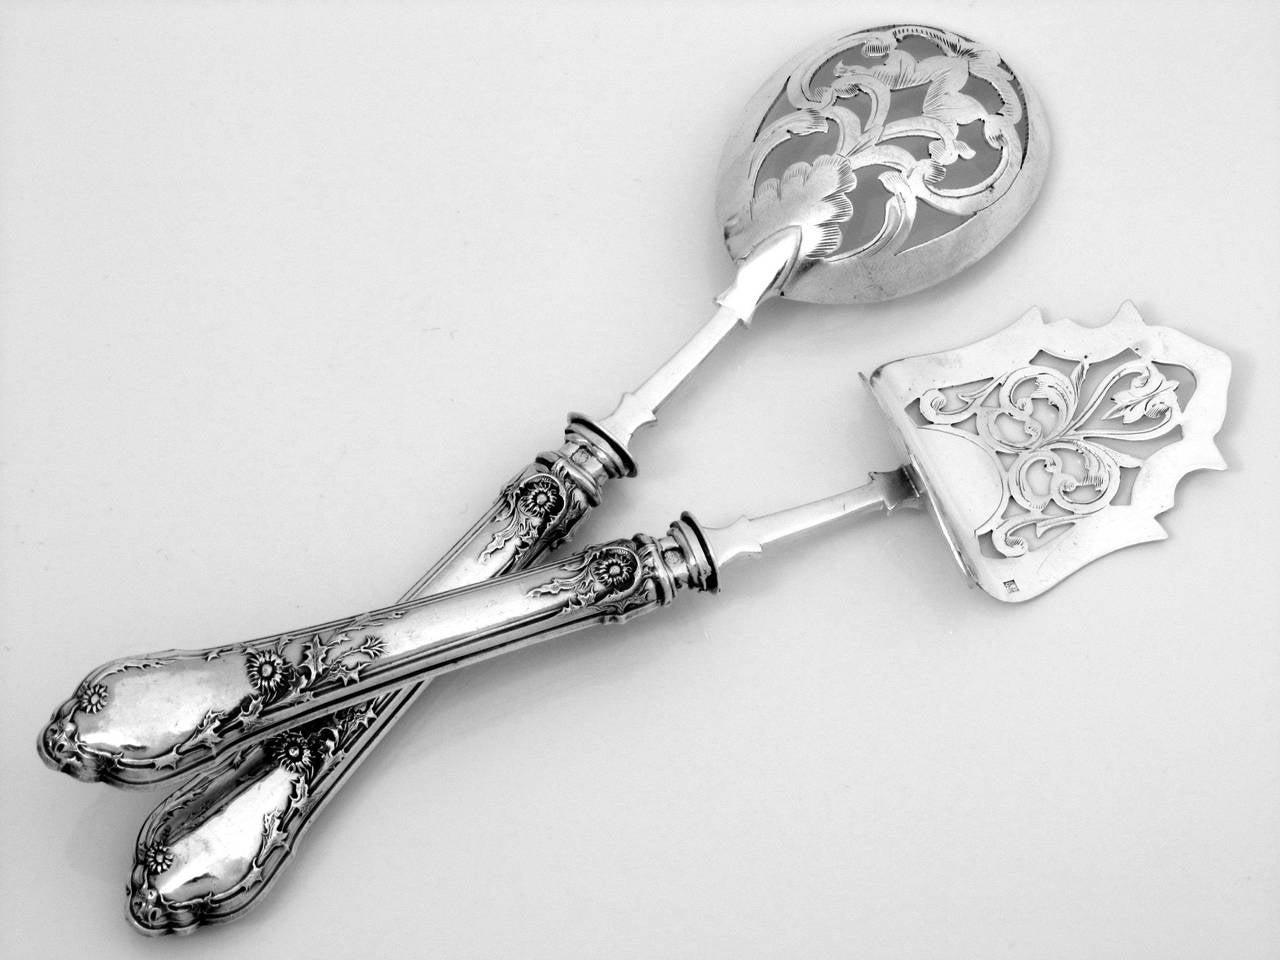 Gorgeous French Sterling Silver Dessert/Hors d'Oeuvre Set 4 pc Art Nouveau For Sale 4